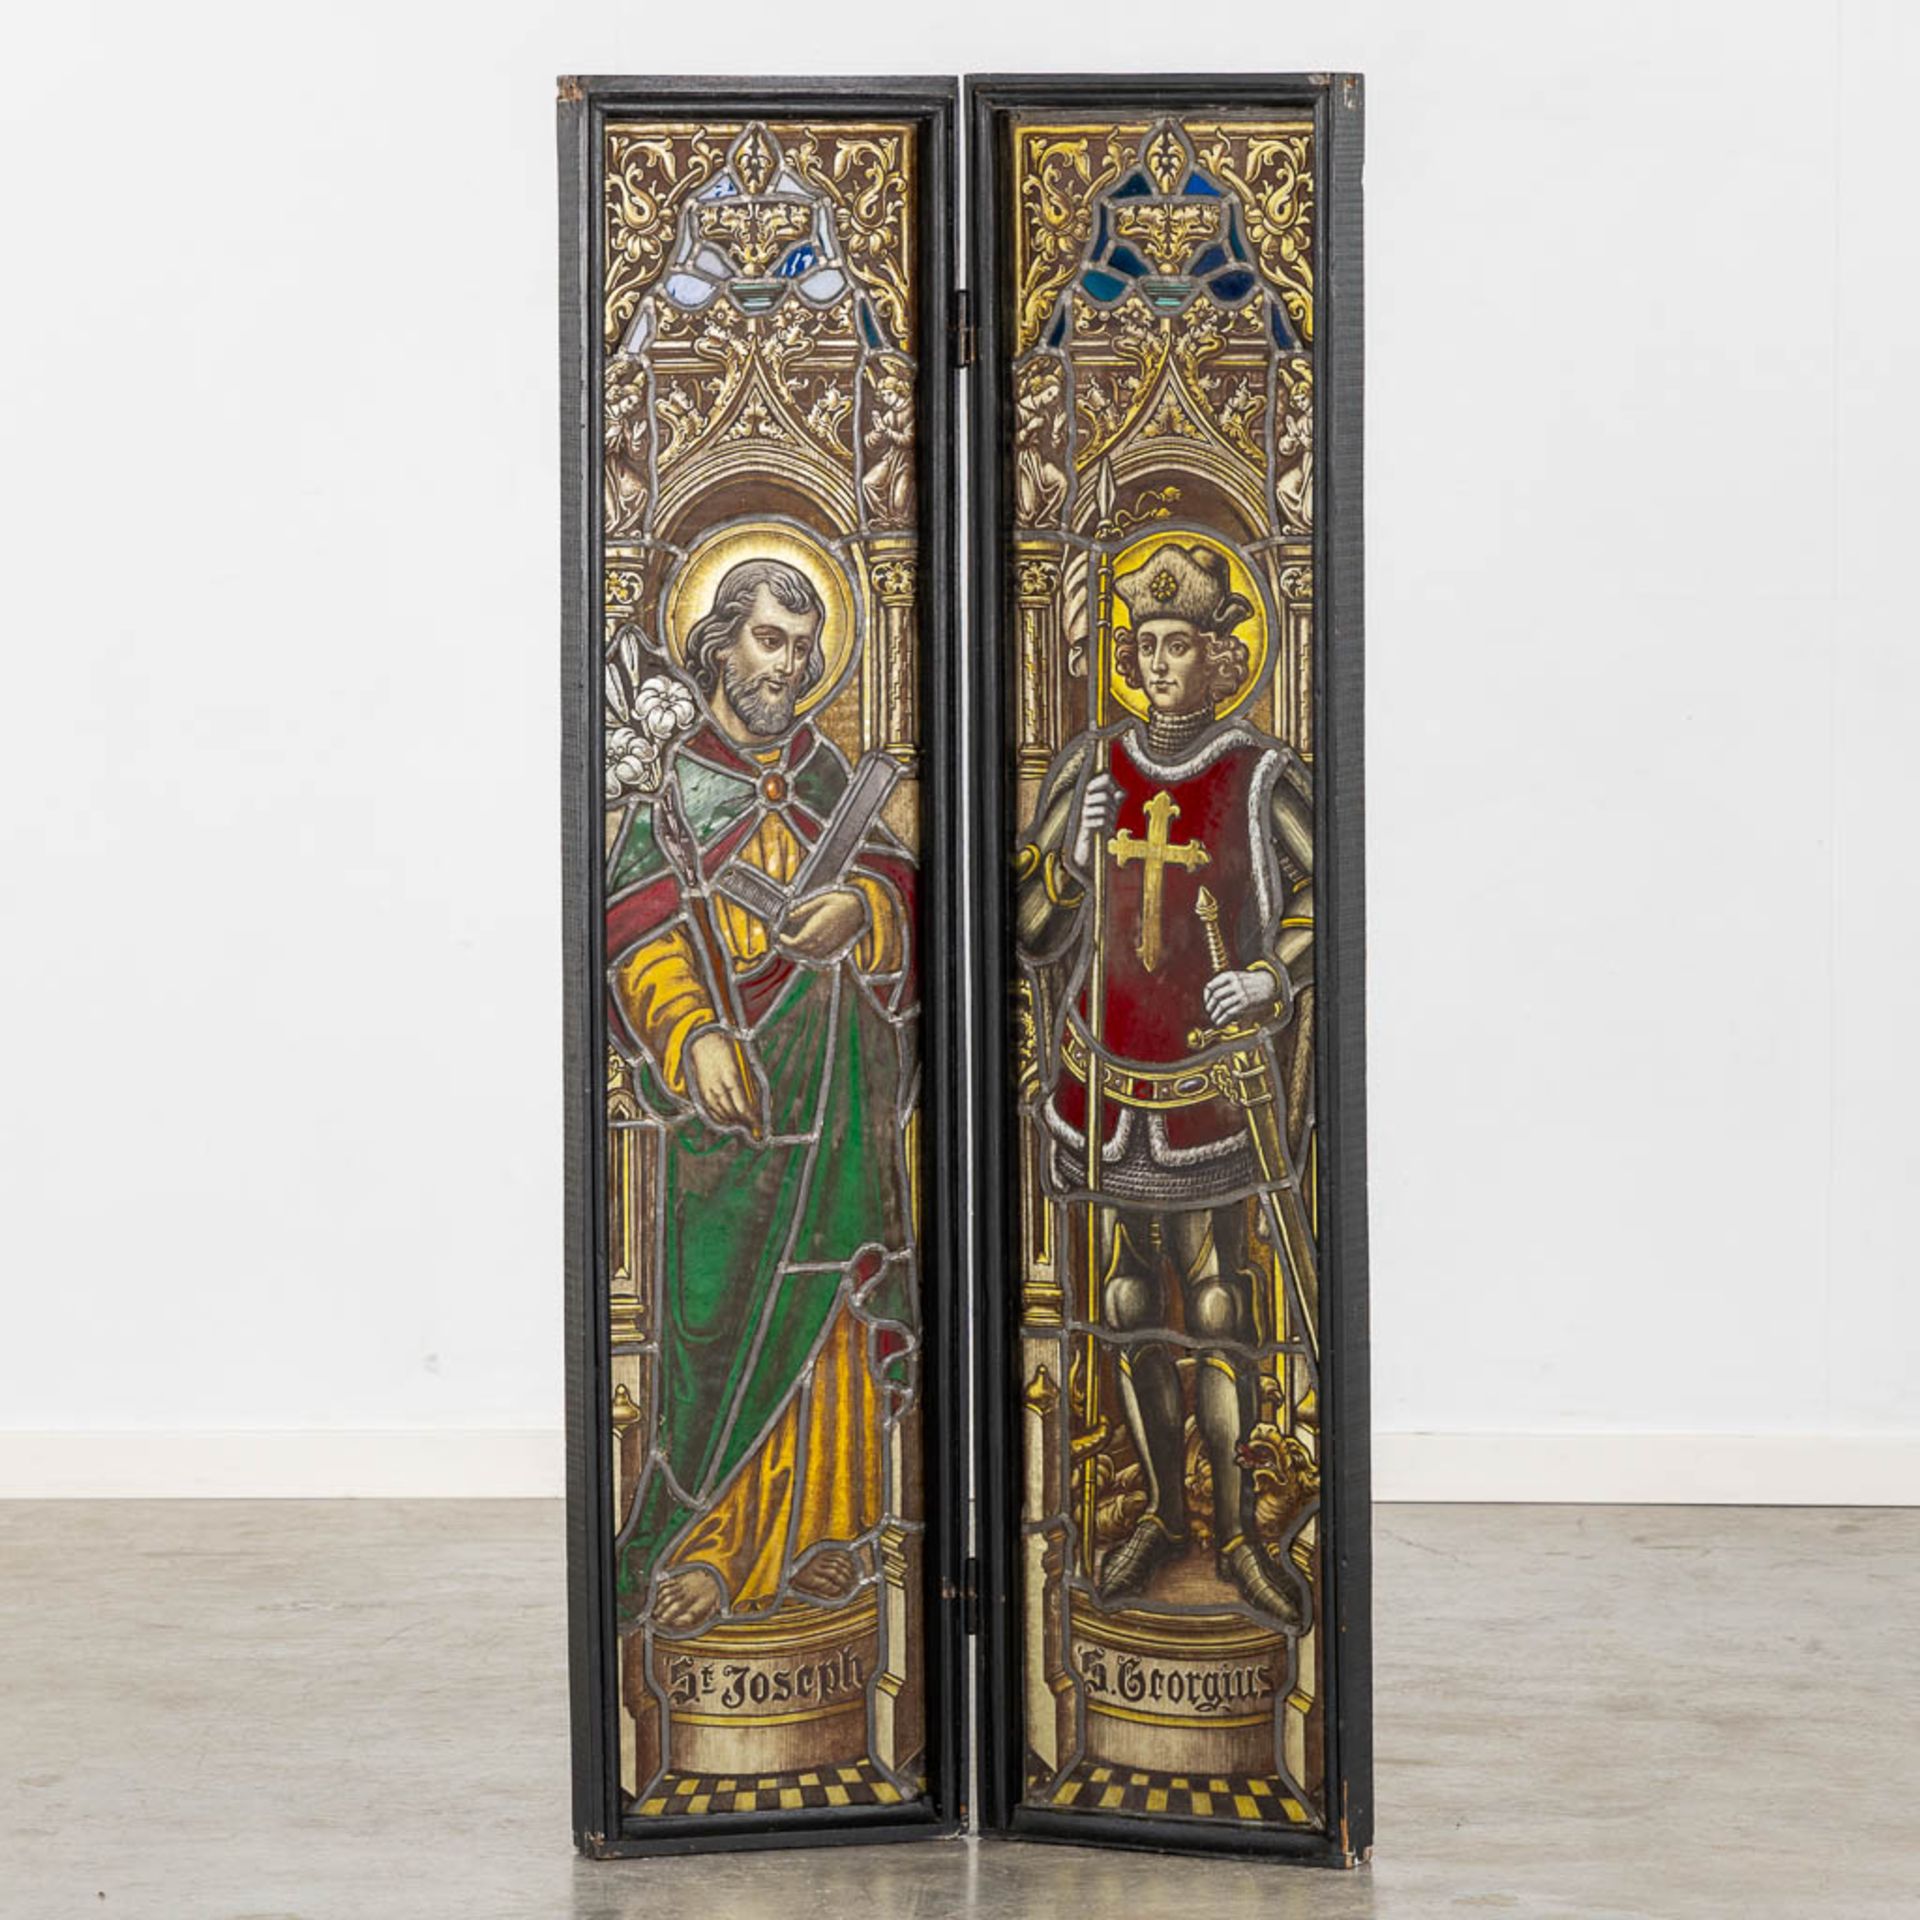 A pendant 'stained glass paintings', Saint Joseph and Gregory, in a wood frame. (W:136 x H:62 cm)